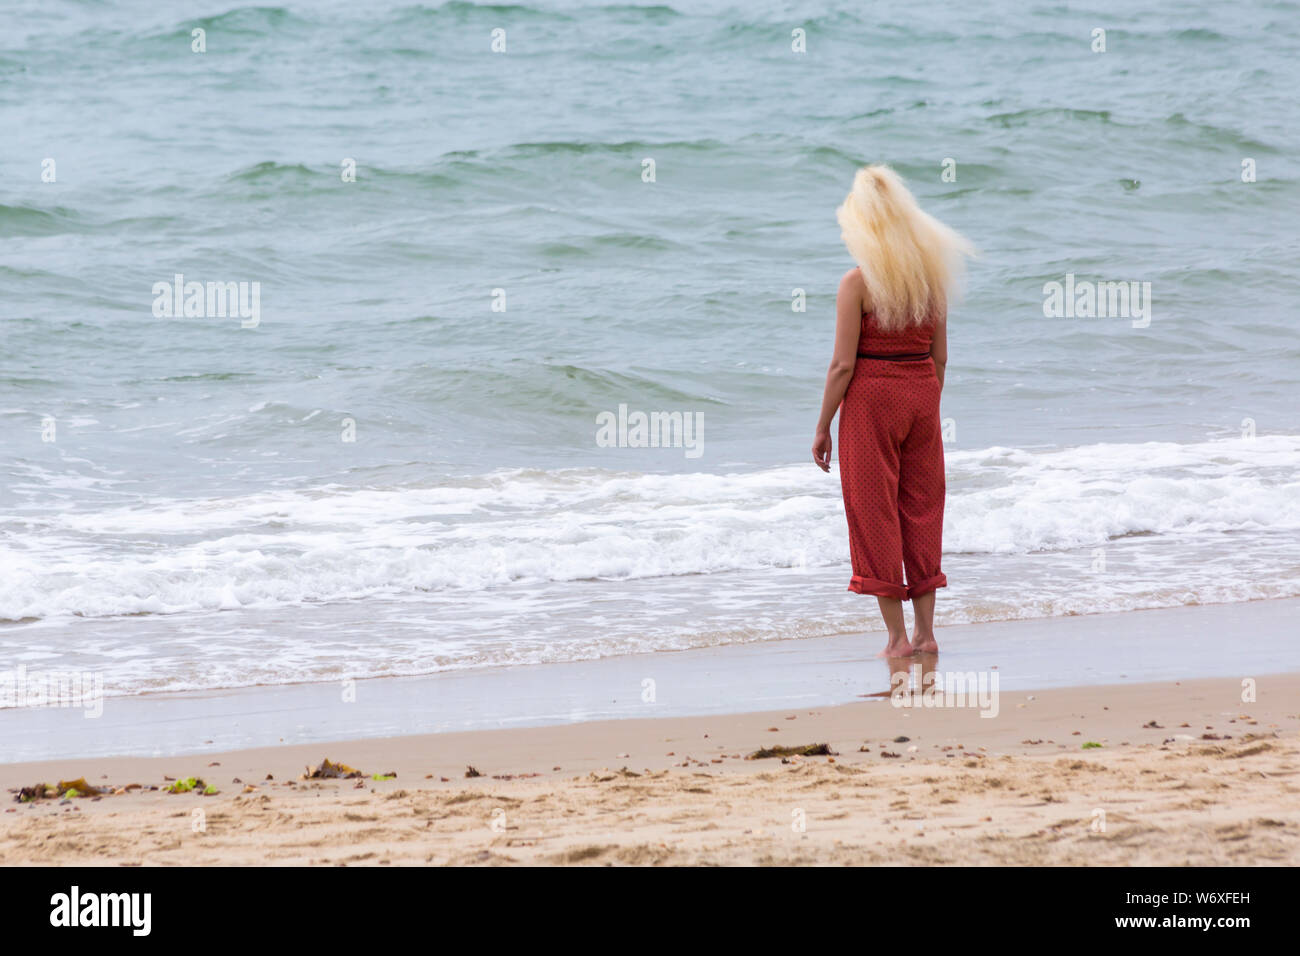 Bournemouth, Dorset UK. 3rd Aug 2019. UK weather: overcast and cloudy, but warm and muggy. Beach goers head to the beaches at Bournemouth to enjoy the warm weather. Woman standing on seashore paddling in the sea - back view rear view. Credit: Carolyn Jenkins/Alamy Live News Stock Photo